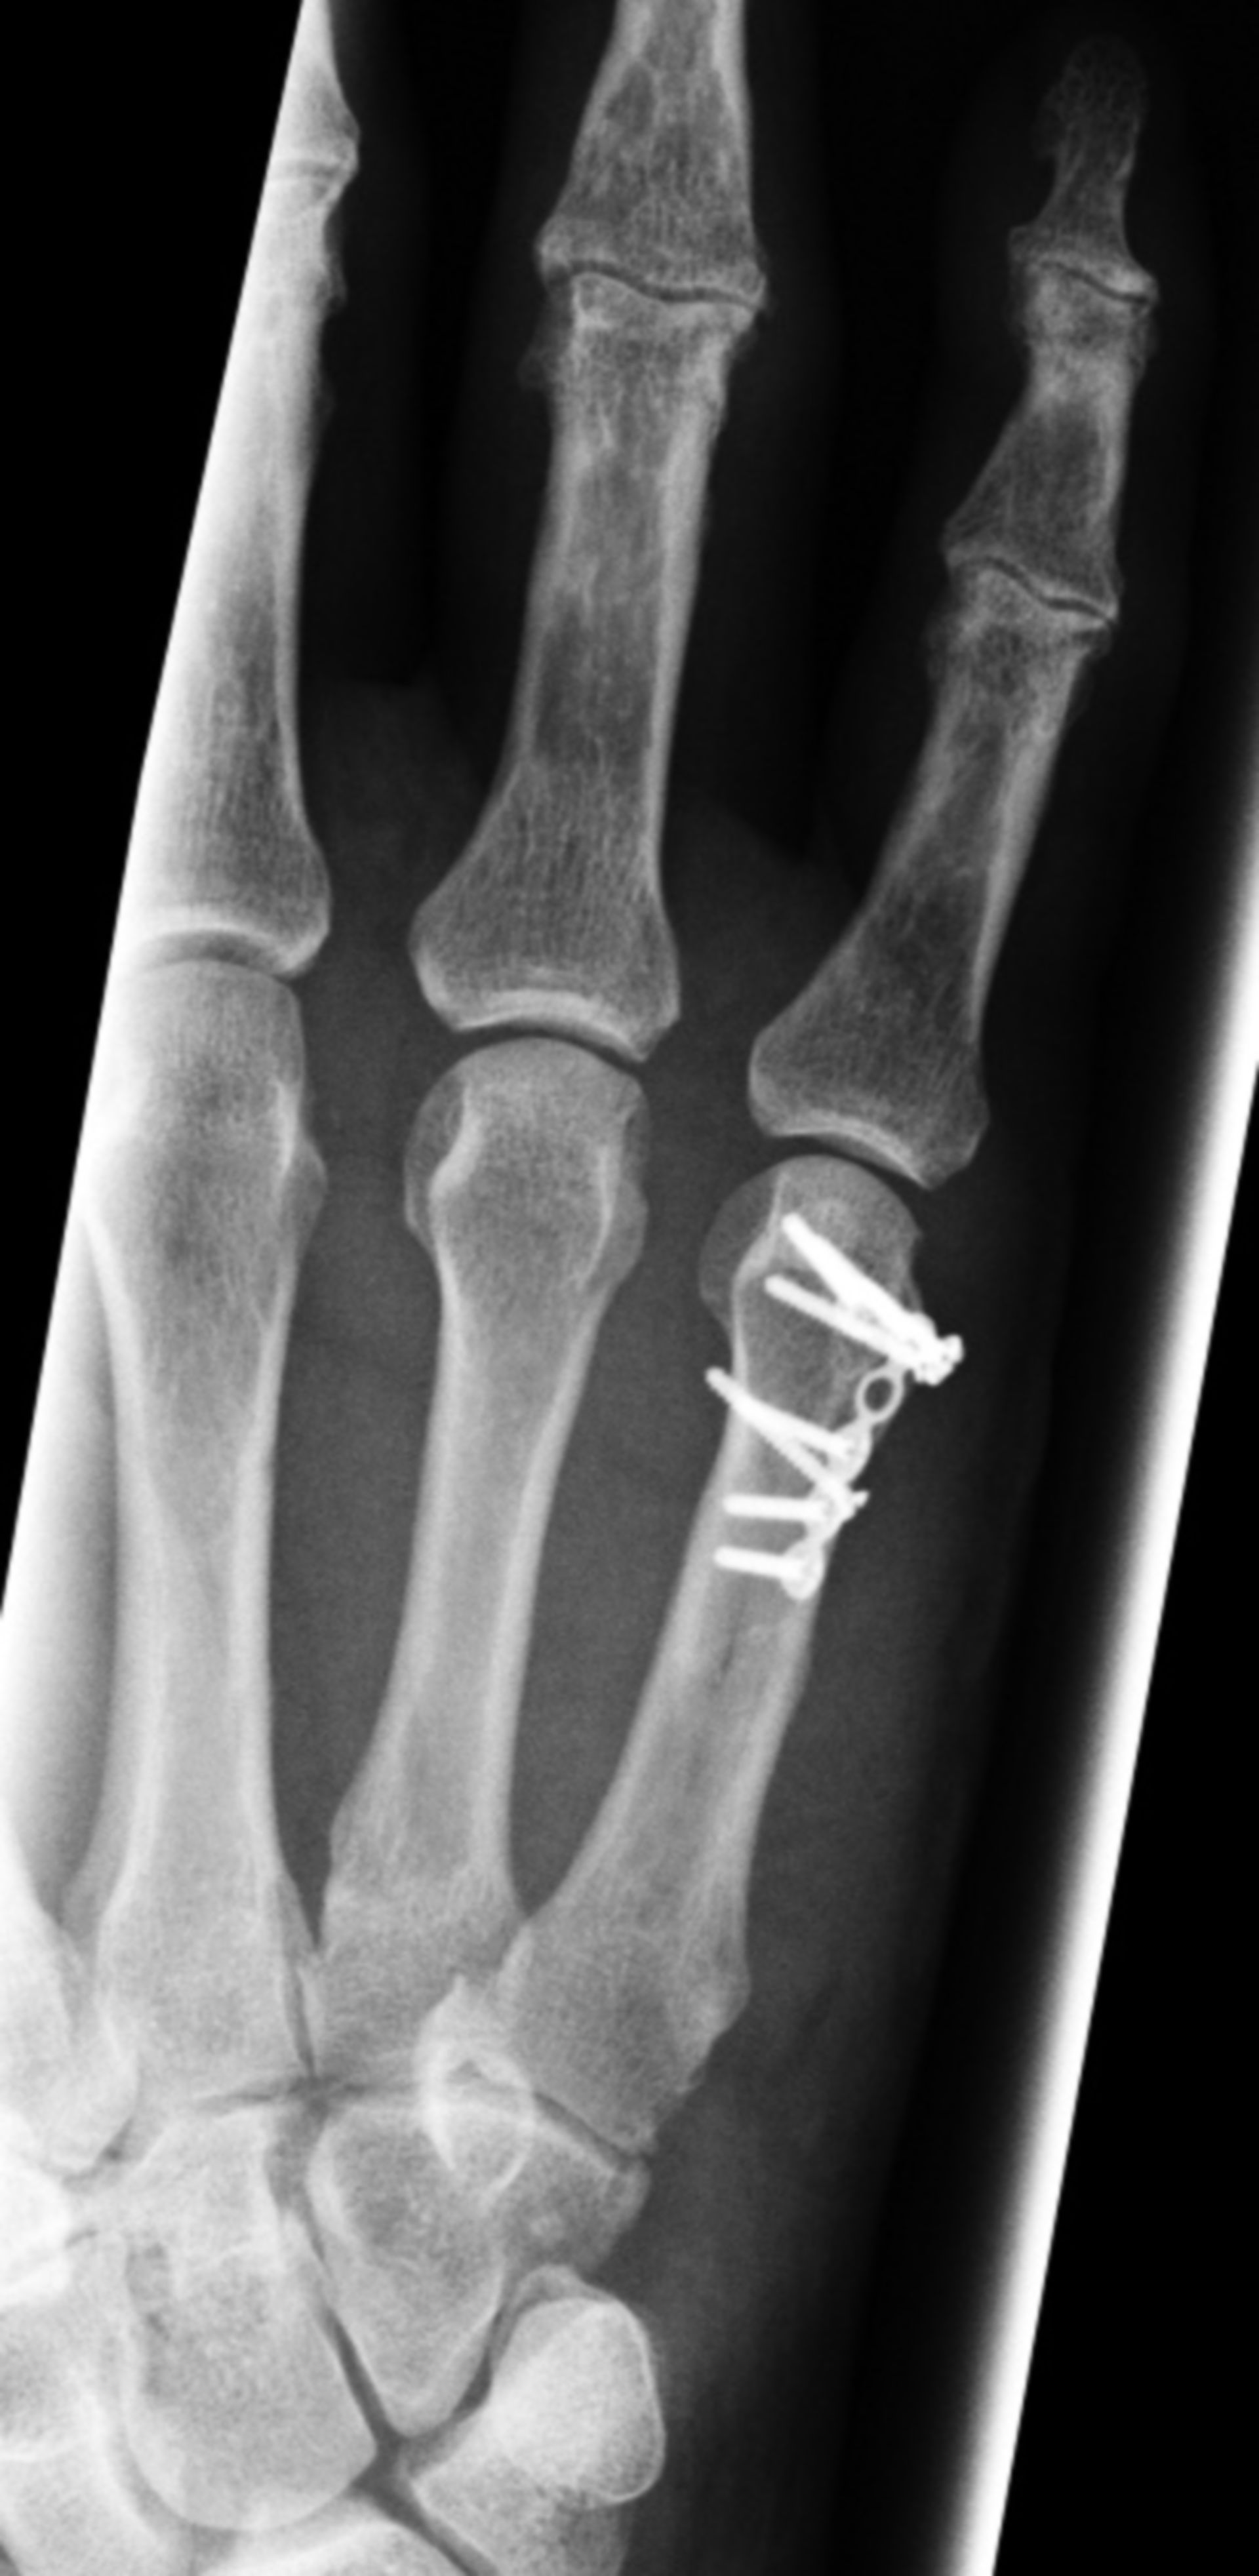 Metacarpal fracture osteosynthesis